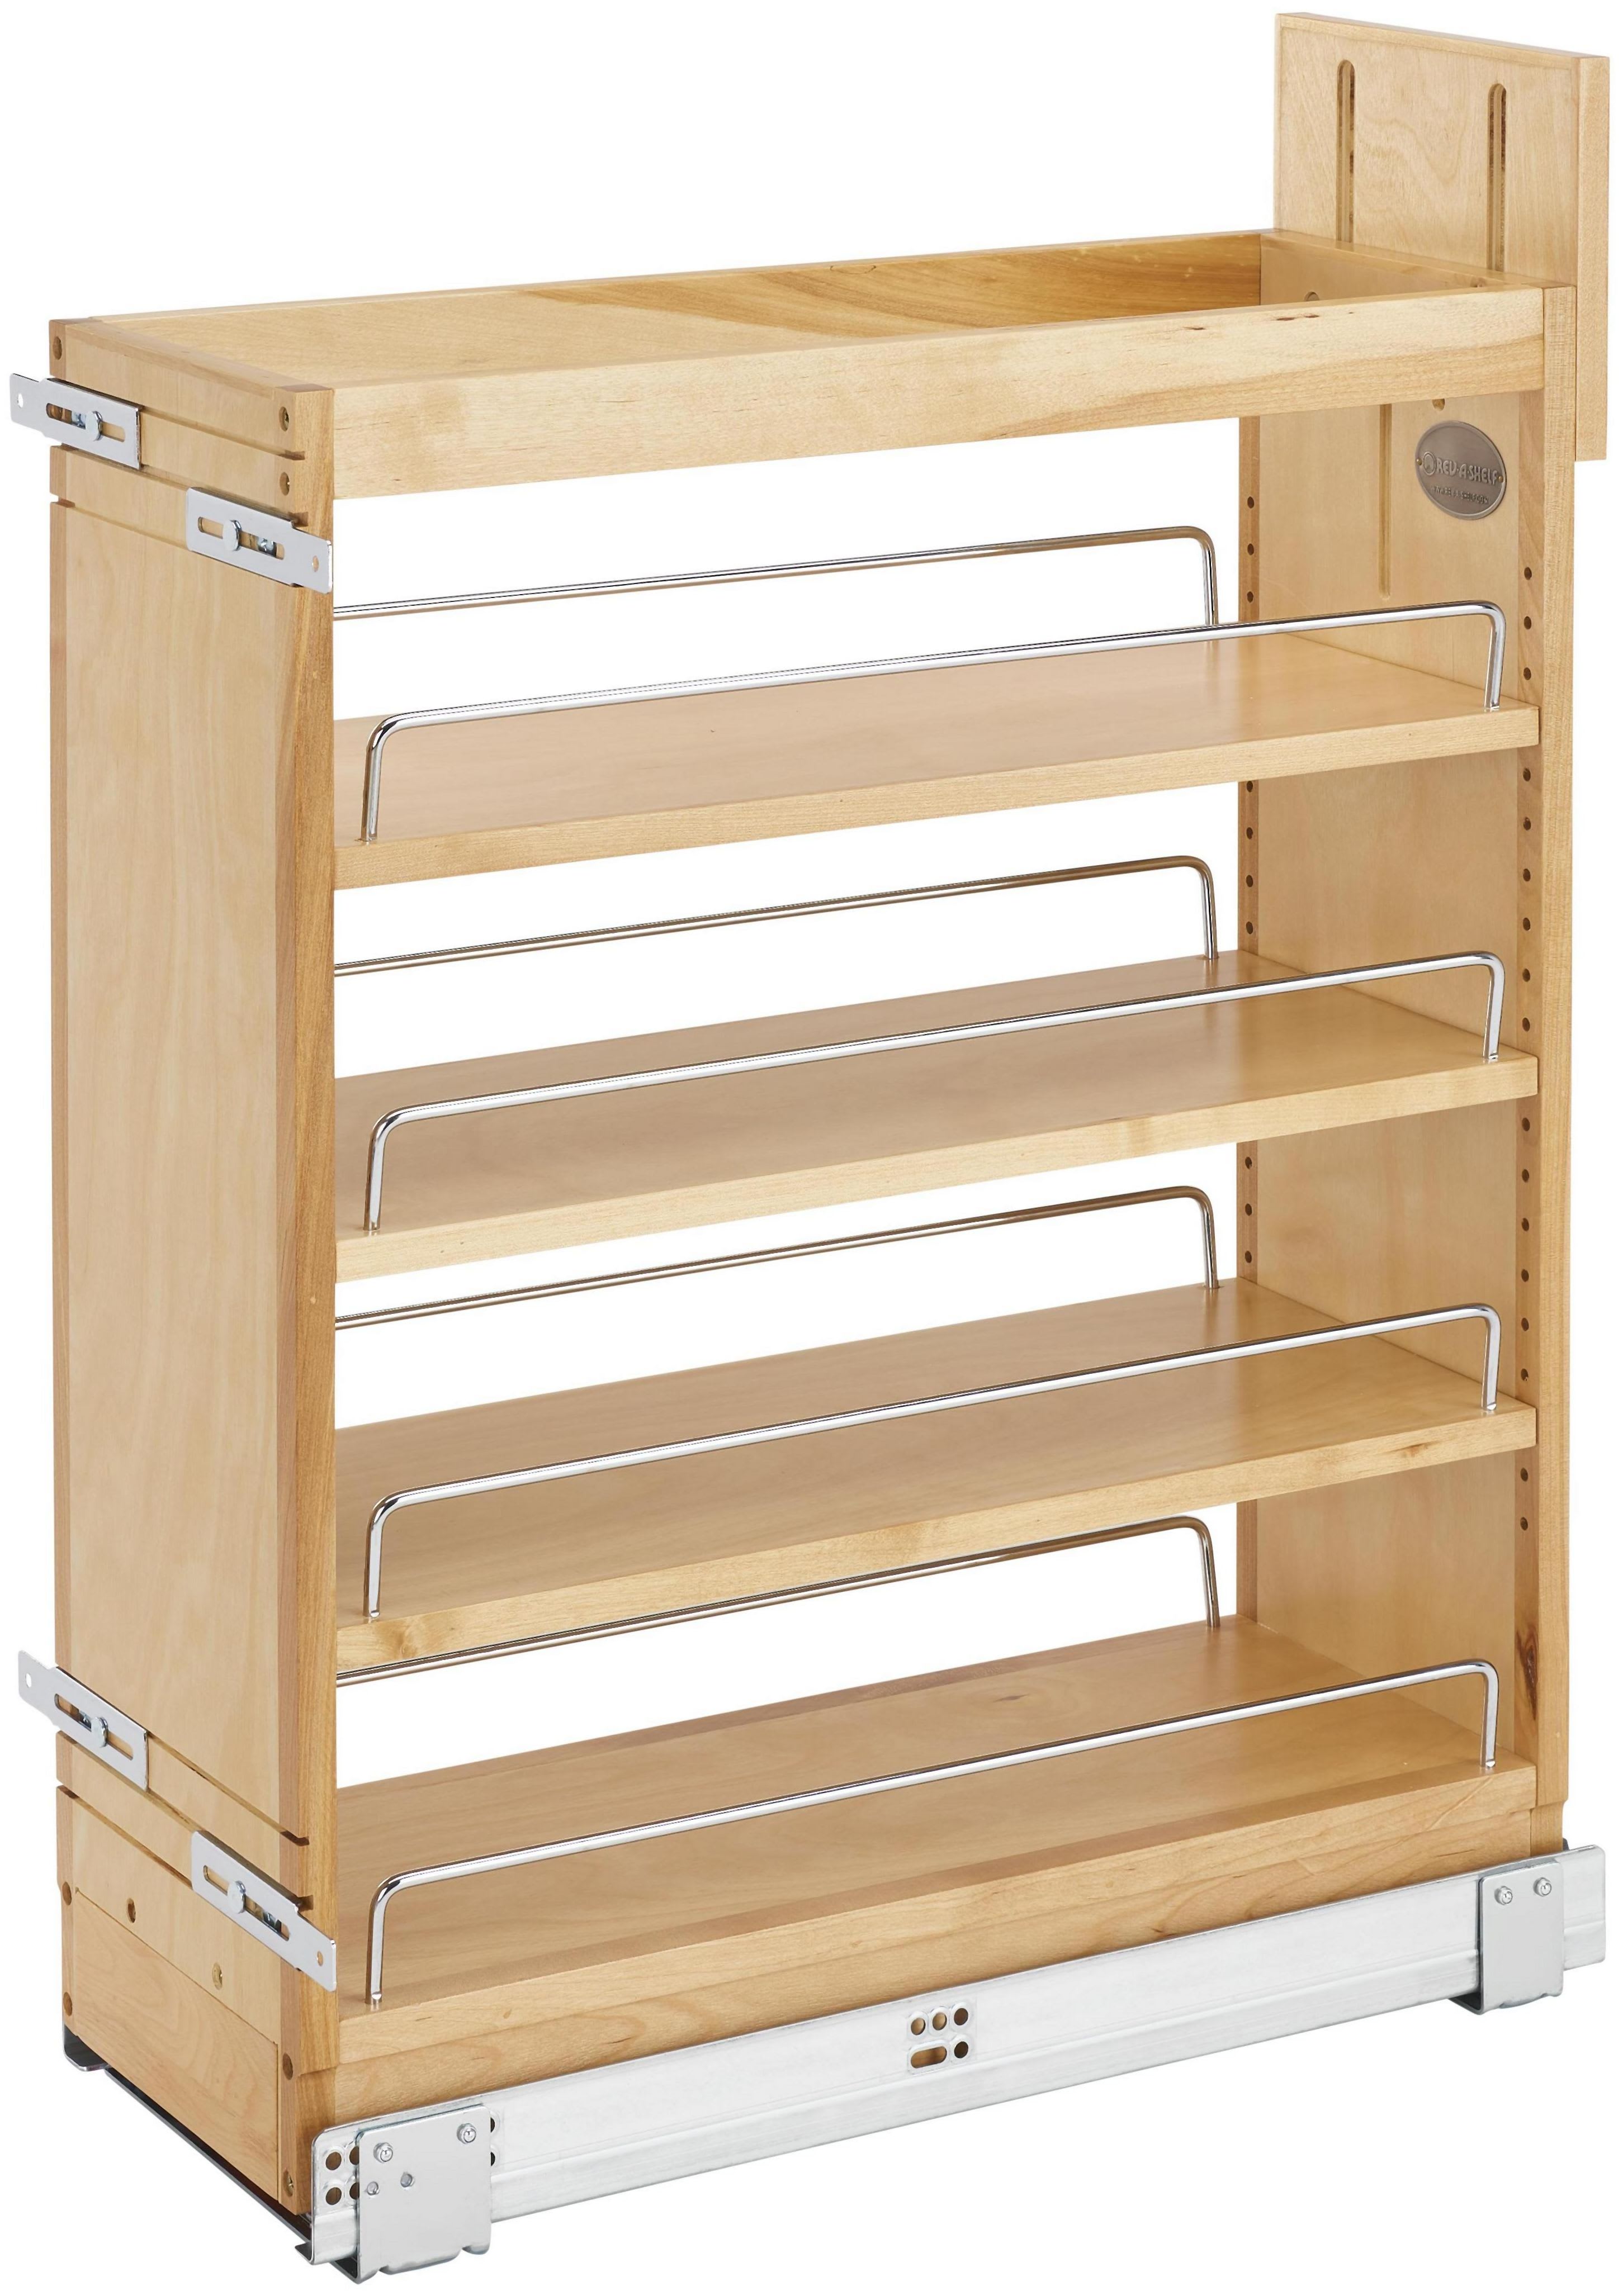 Rev-A-Shelf 6-1/2 Inch Width Wood Pull-Out Organizer with